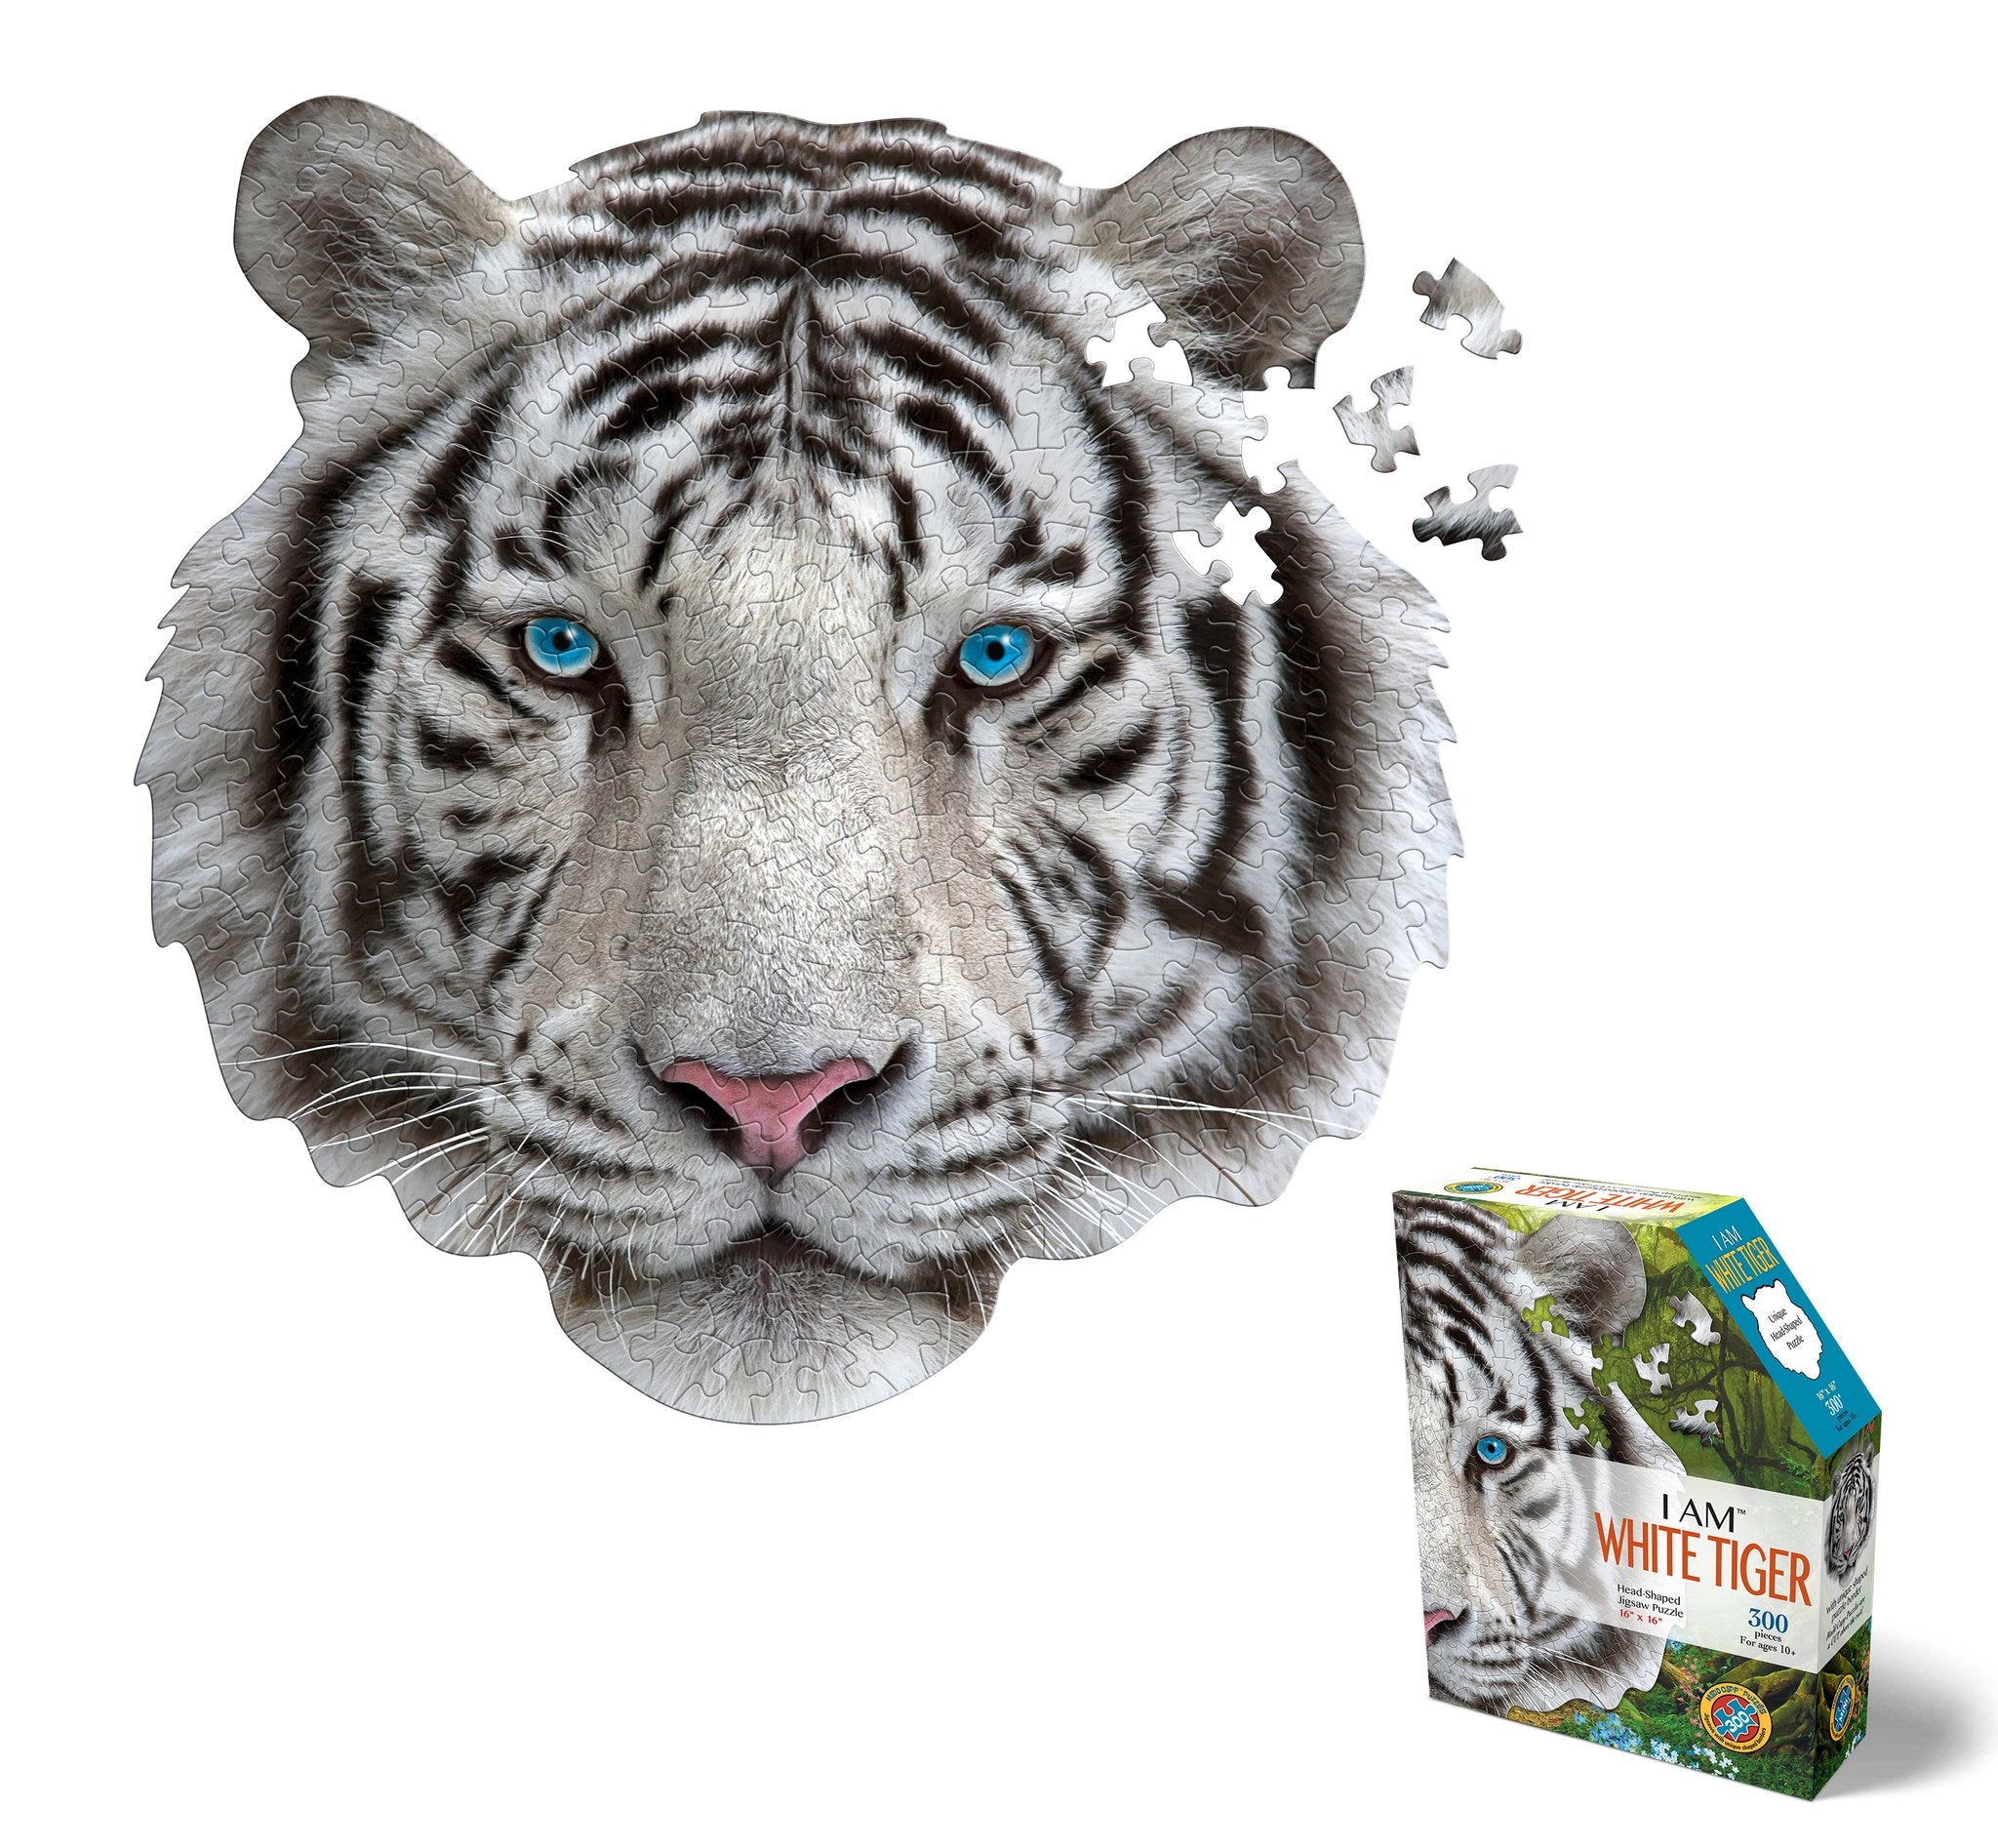 I Am White Tiger (300 piece shaped puzzle)